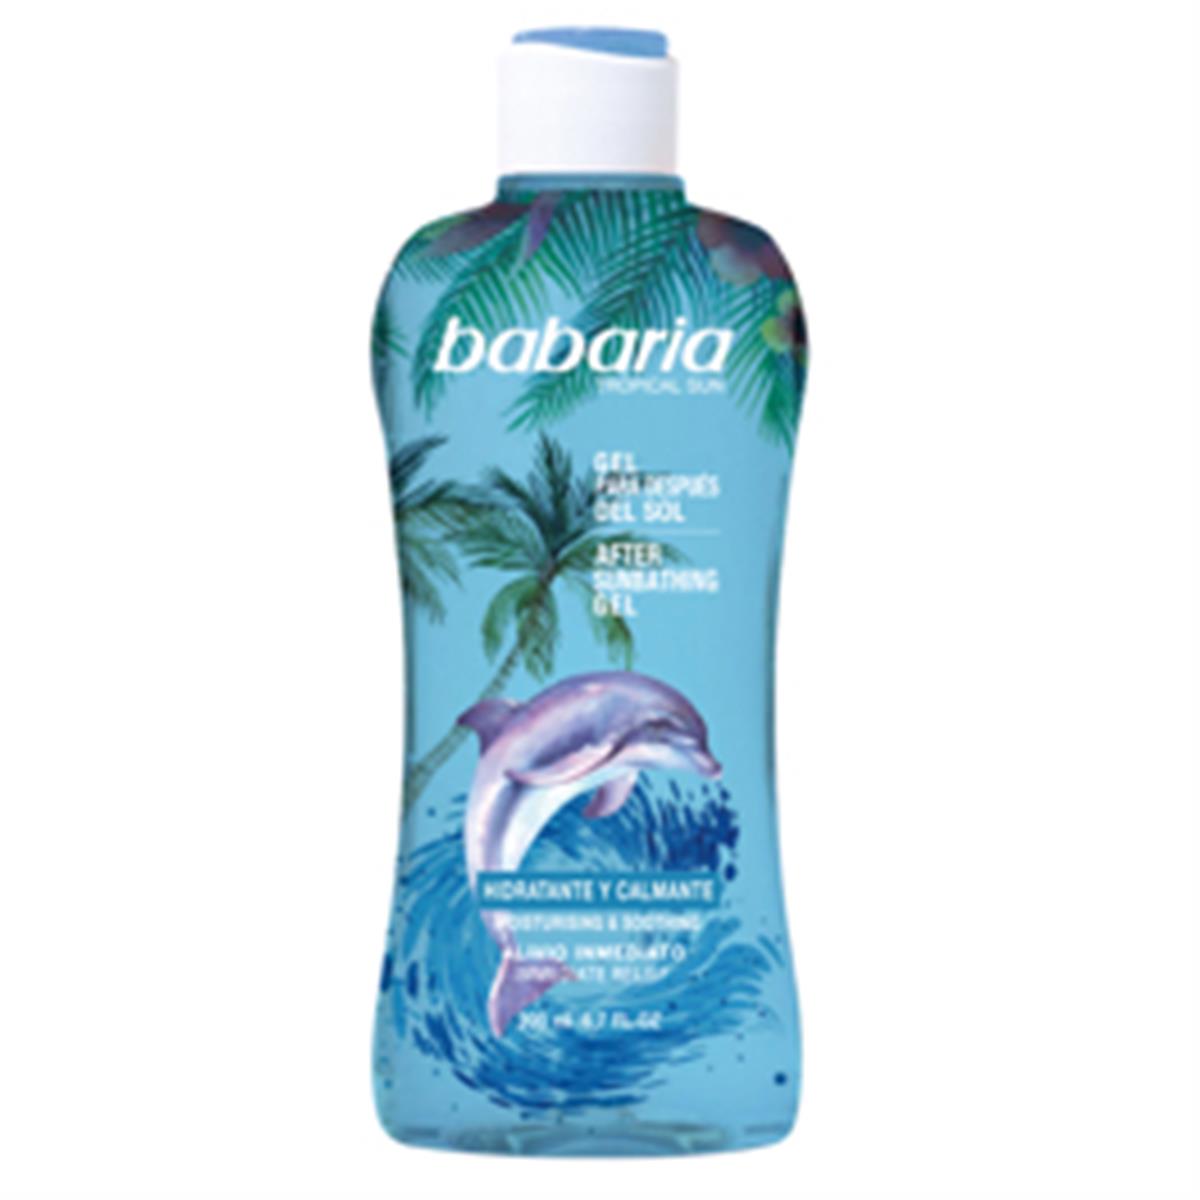 Aftersun Tropical 200 ml